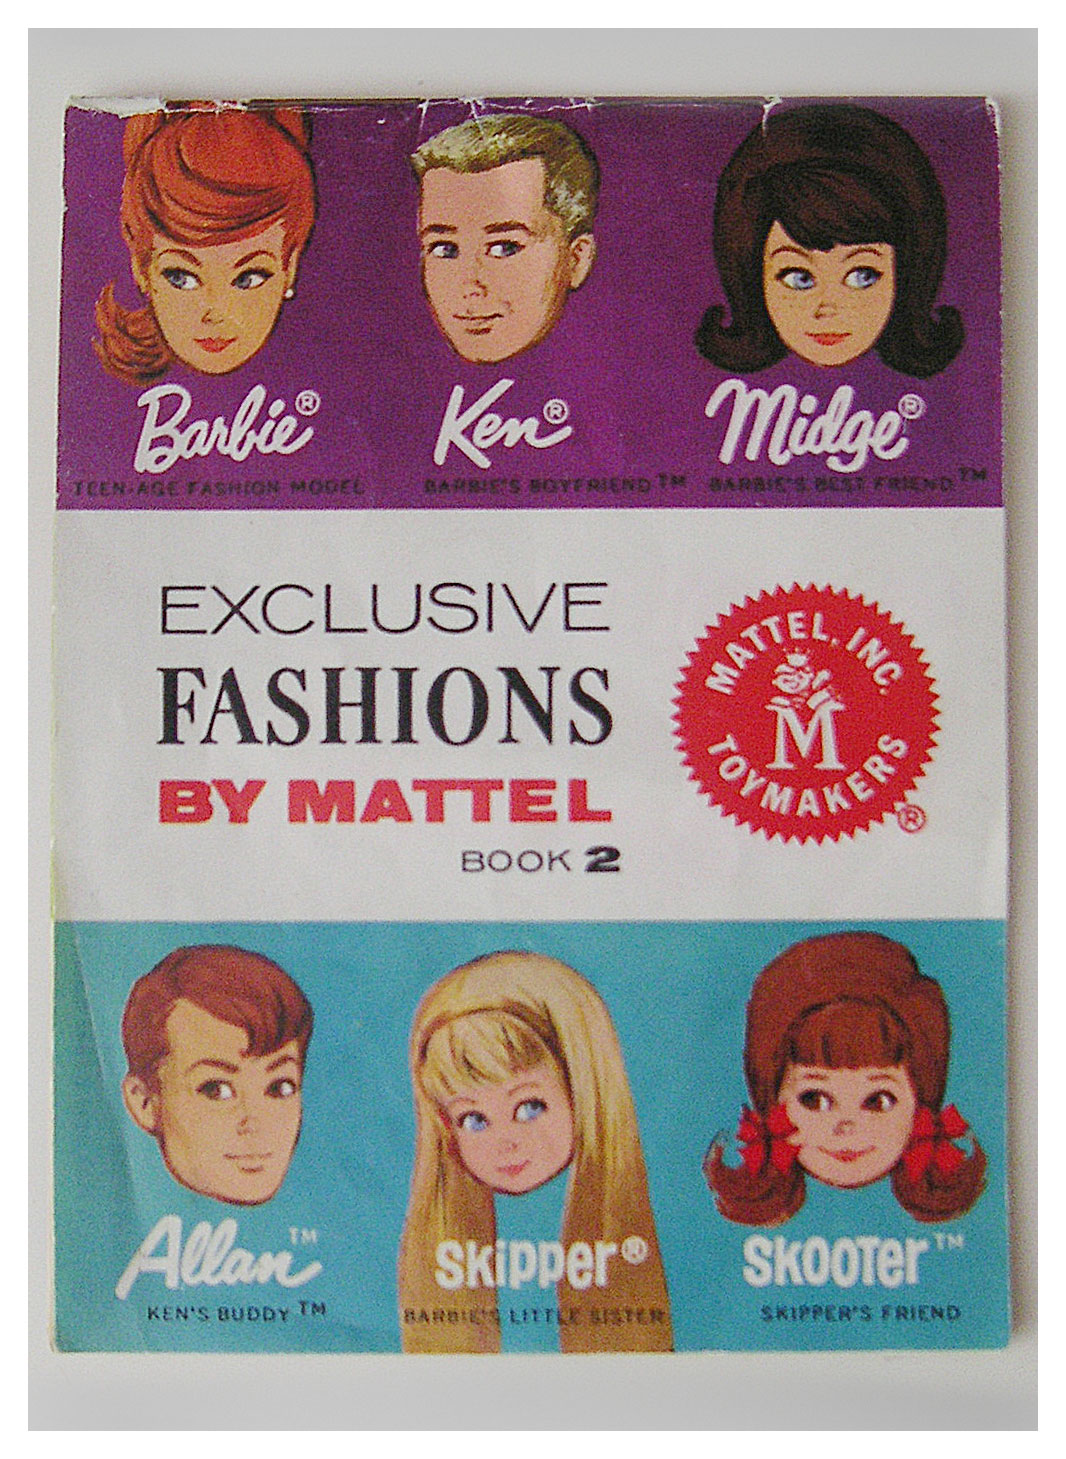 1965 Fashion Exclusives book 2